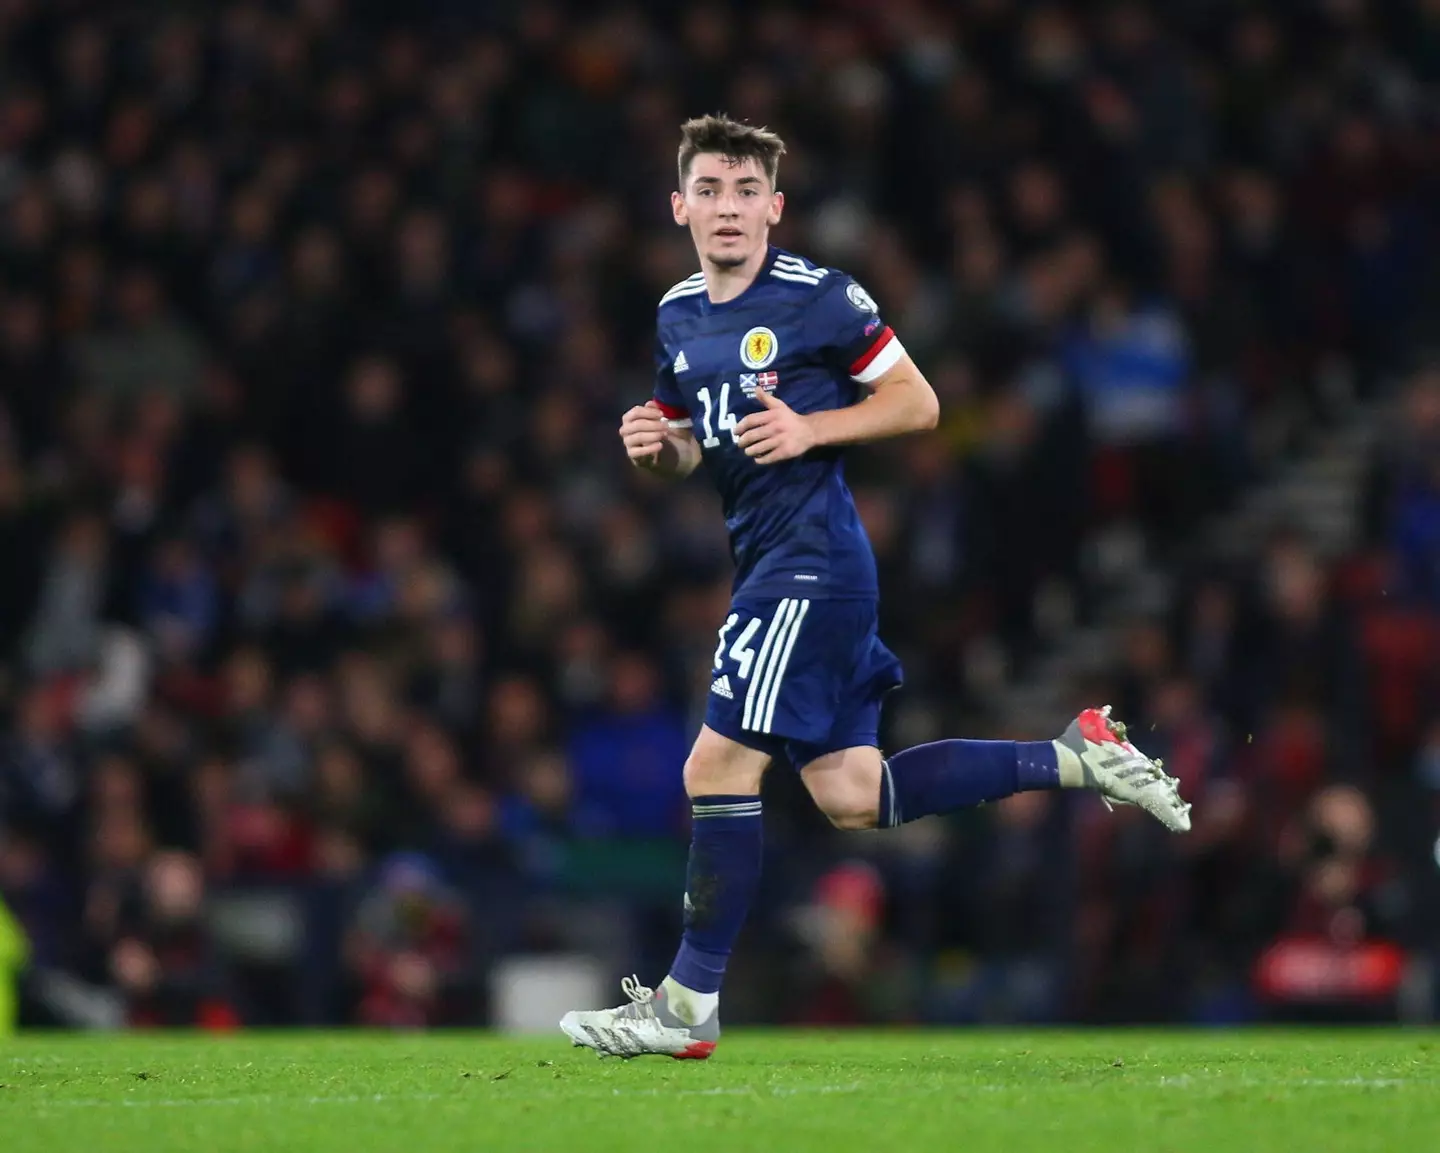  Billy Gilmour of Scotland in a FIFA World Cup 2022 qualification match for Scotland versus Denmark. (Alamy)